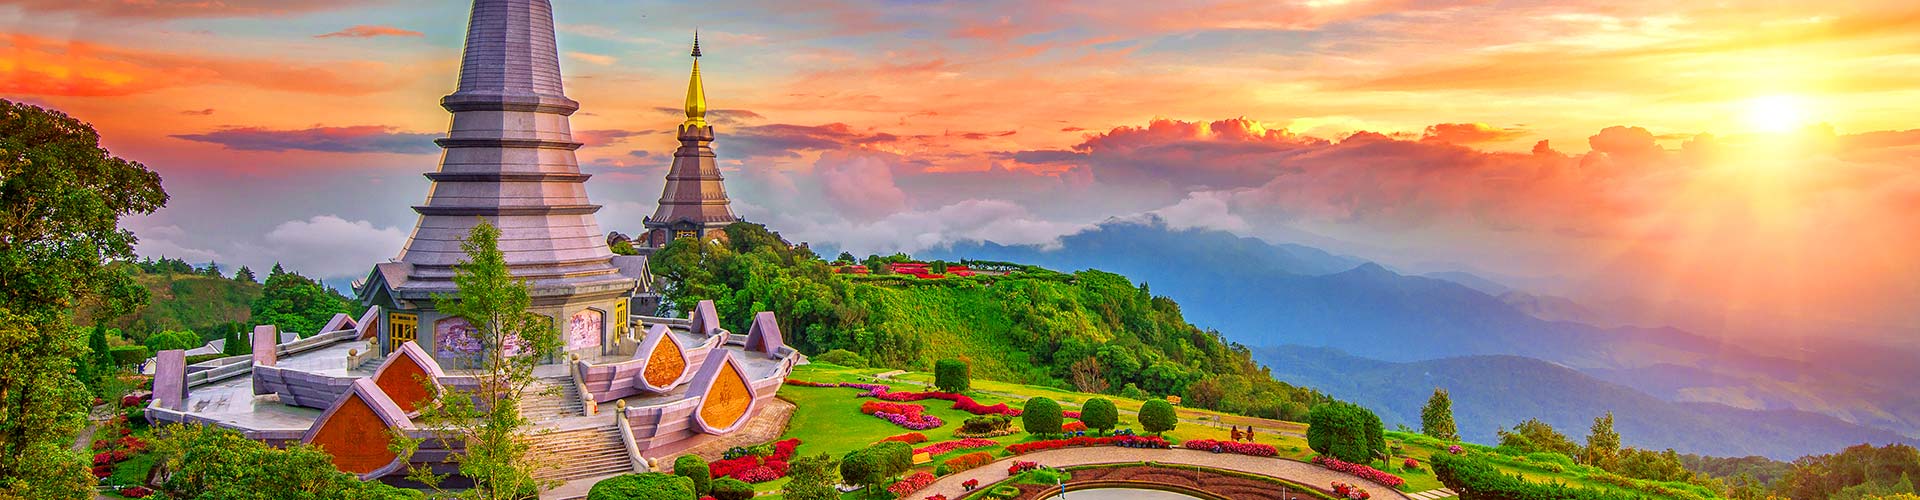 Thailand Holidays 2019/2020 - Cheap Thailand Holiday Packages